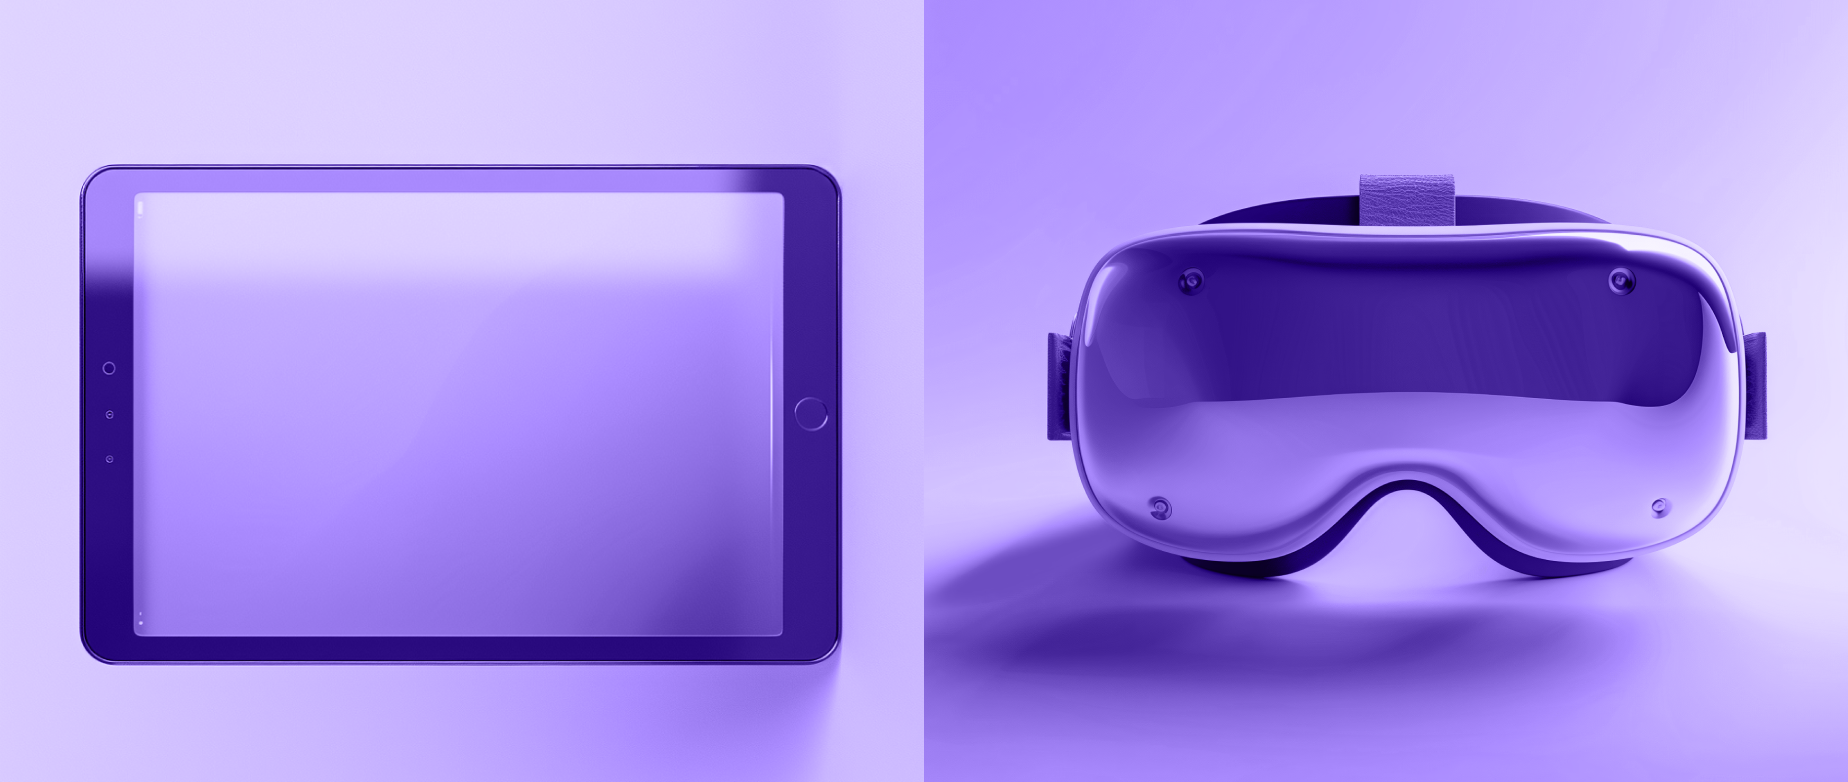 A split purple image with a tablet next to a VR headset.